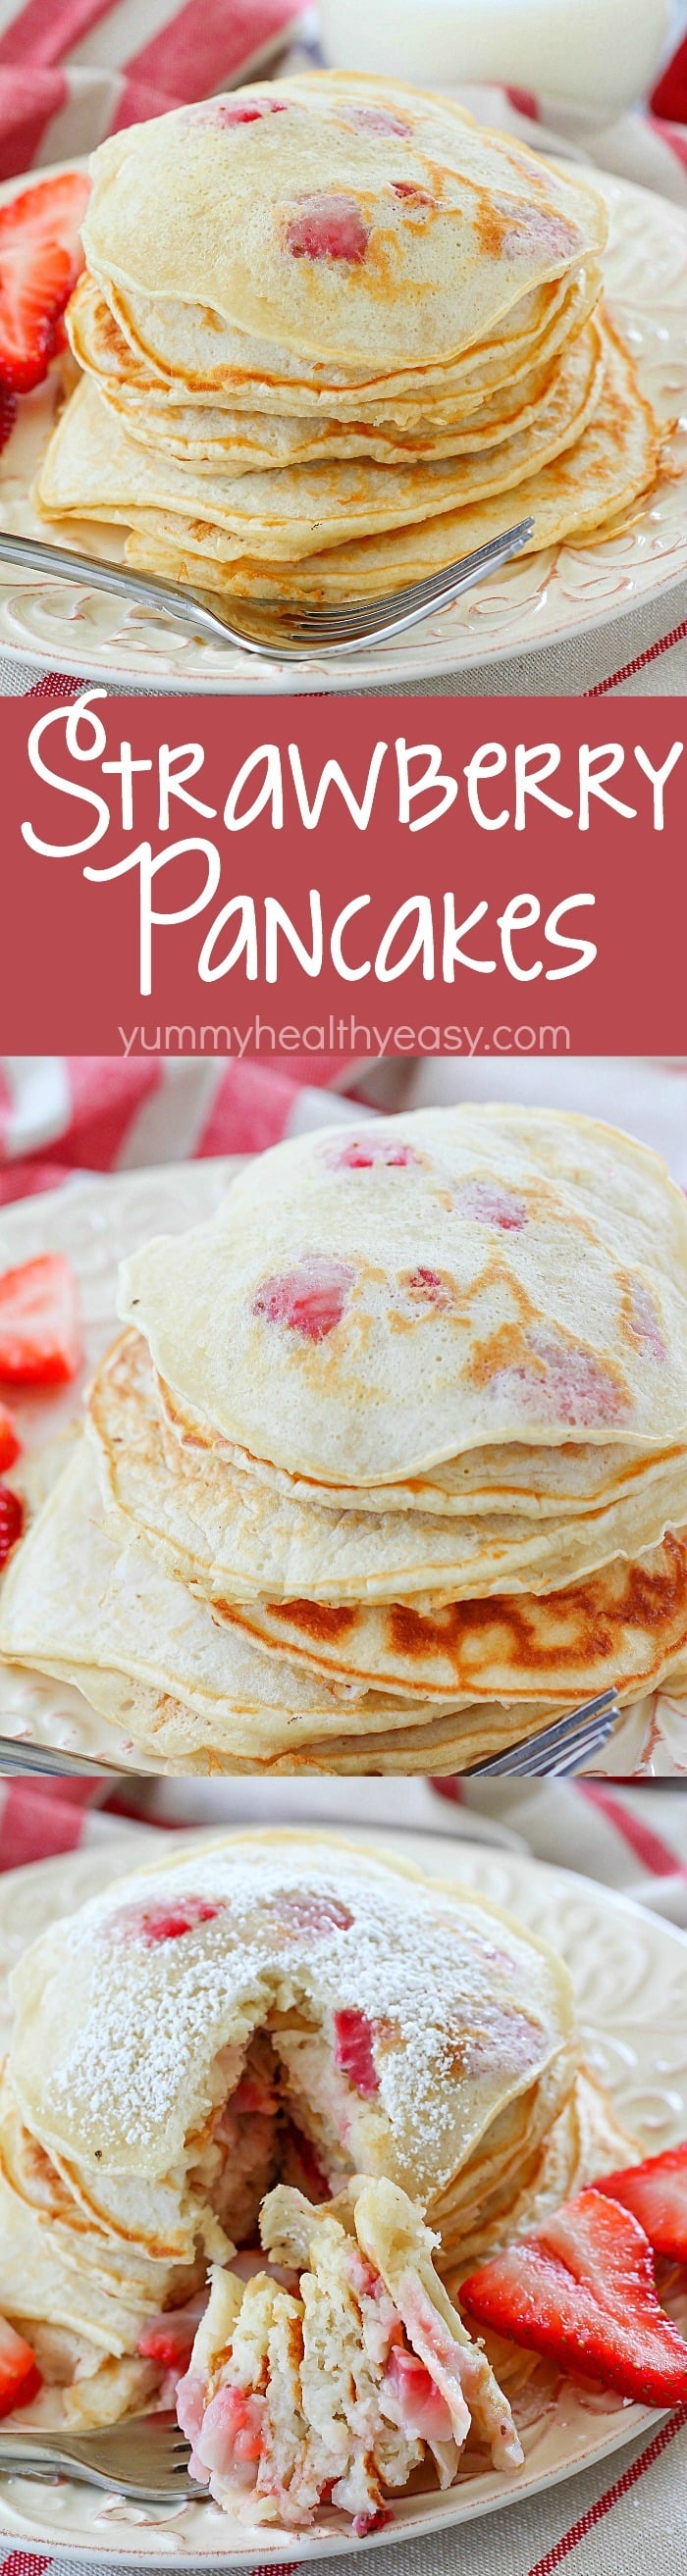 Start your day right with a stack of Strawberry Pancakes! These pancakes are packed with cubed strawberries and are so light and fluffy! They're a quick and easy to make breakfast the whole family will love!